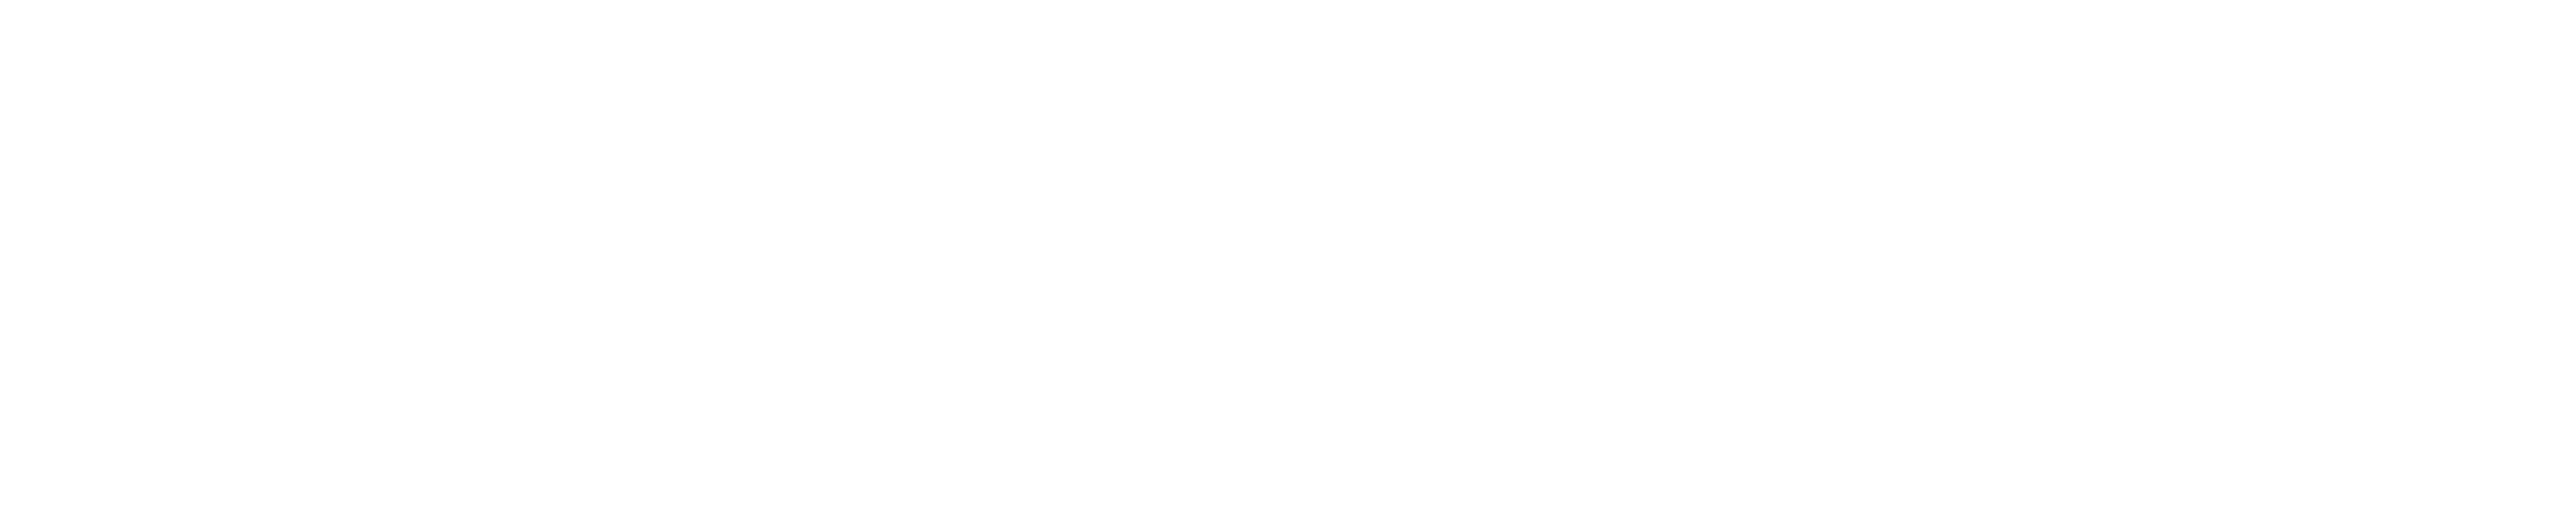 NextRequest logo in white with powered by CivicPlus text